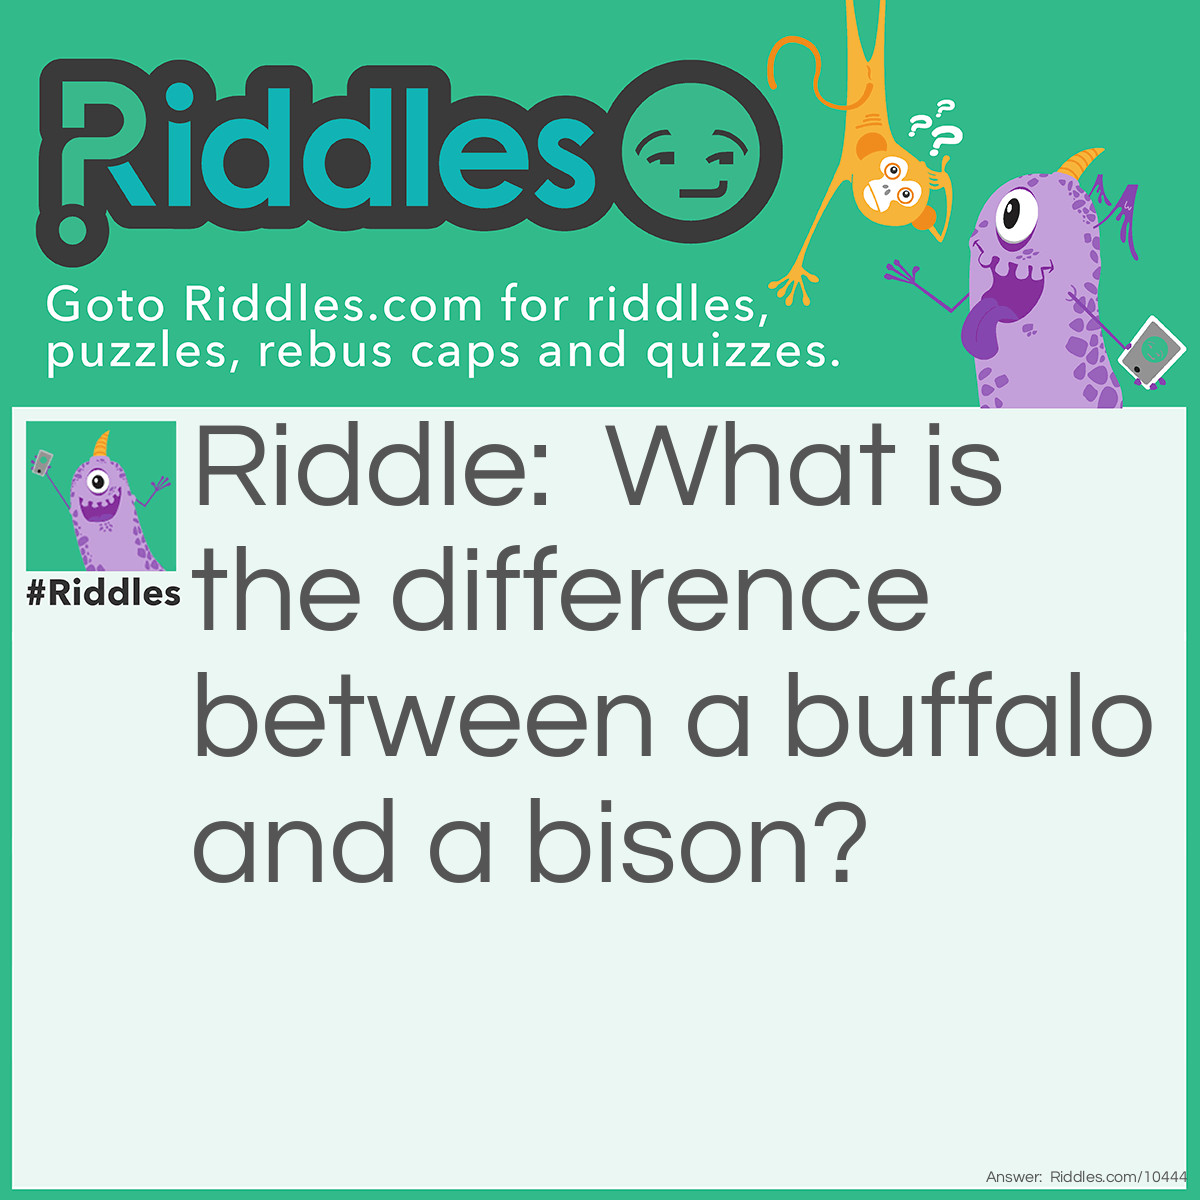 Riddle: What is the difference between a buffalo and a bison? Answer: You cannot wash hands in a buffalo.